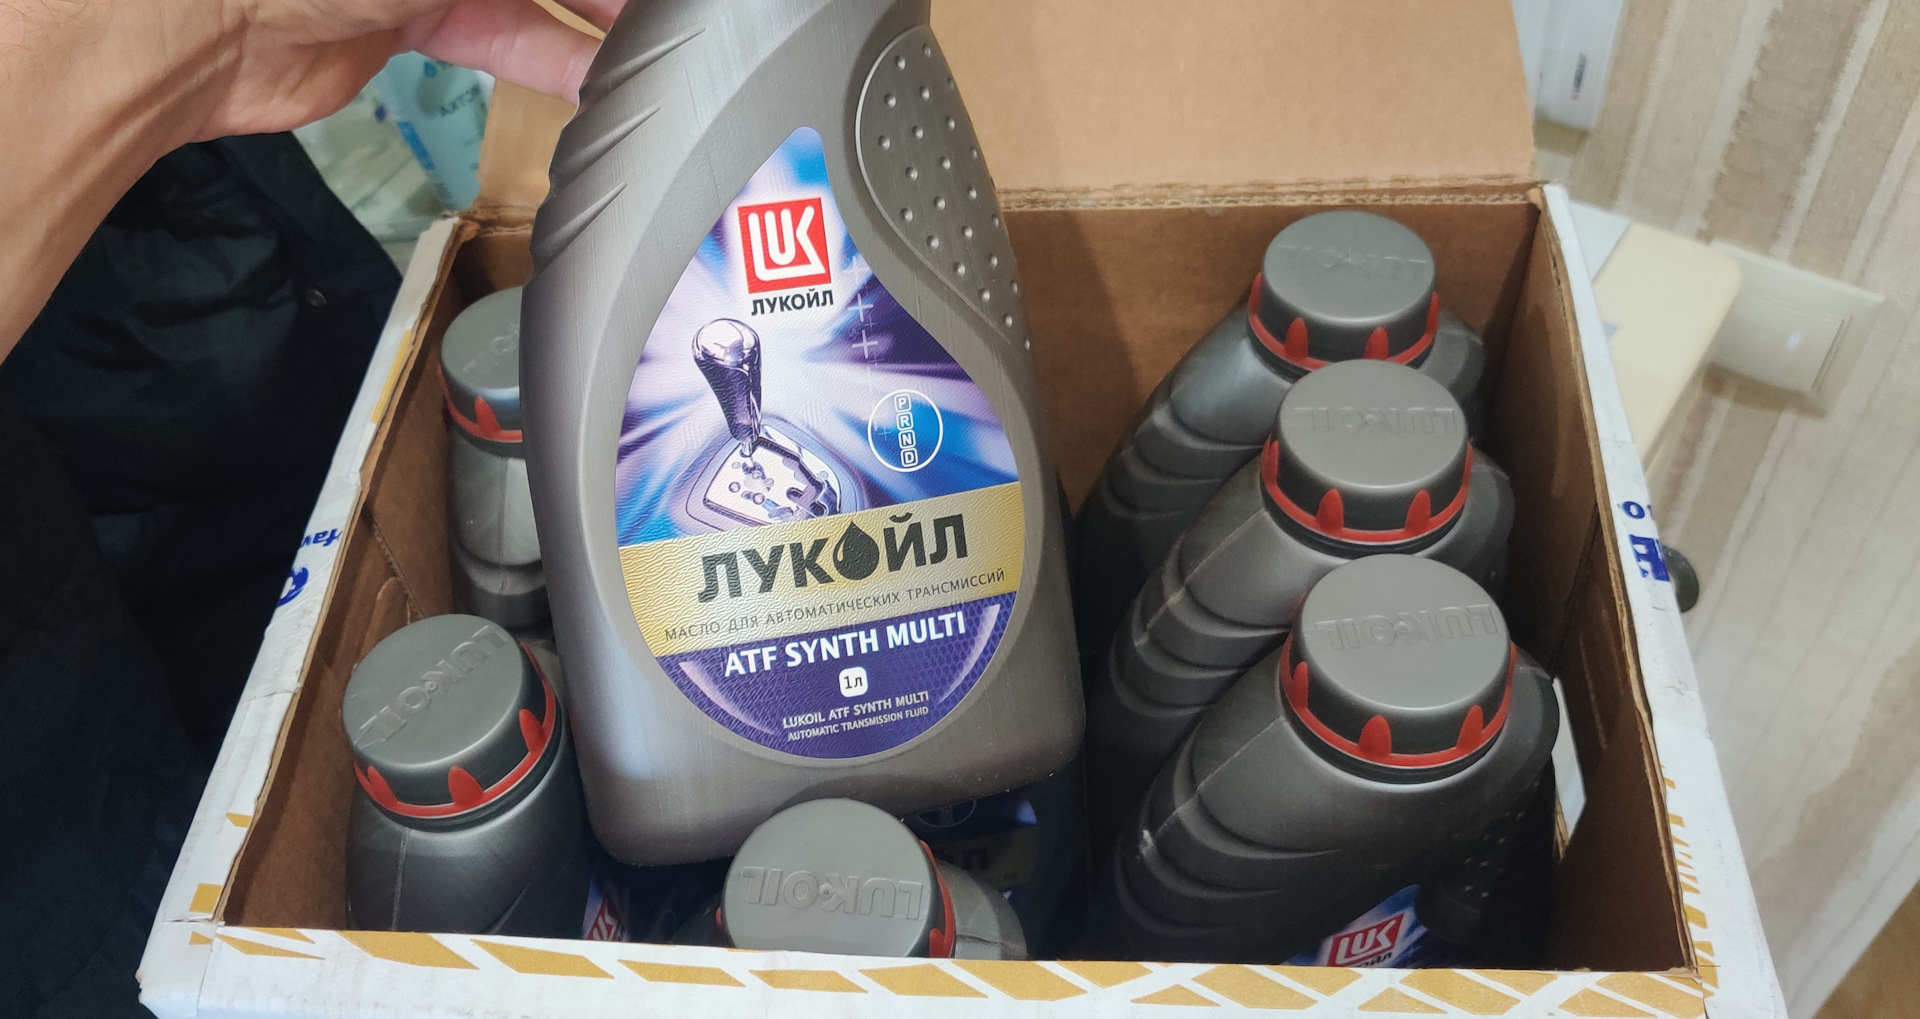 Atf synth multi. 1611442 Лукойл ATF Synth Multi. Лукойл Мульти АТФ. Lukoil ATF Synth Multi. Лукойл 3132749 жидкость трансмиссионная ATF.